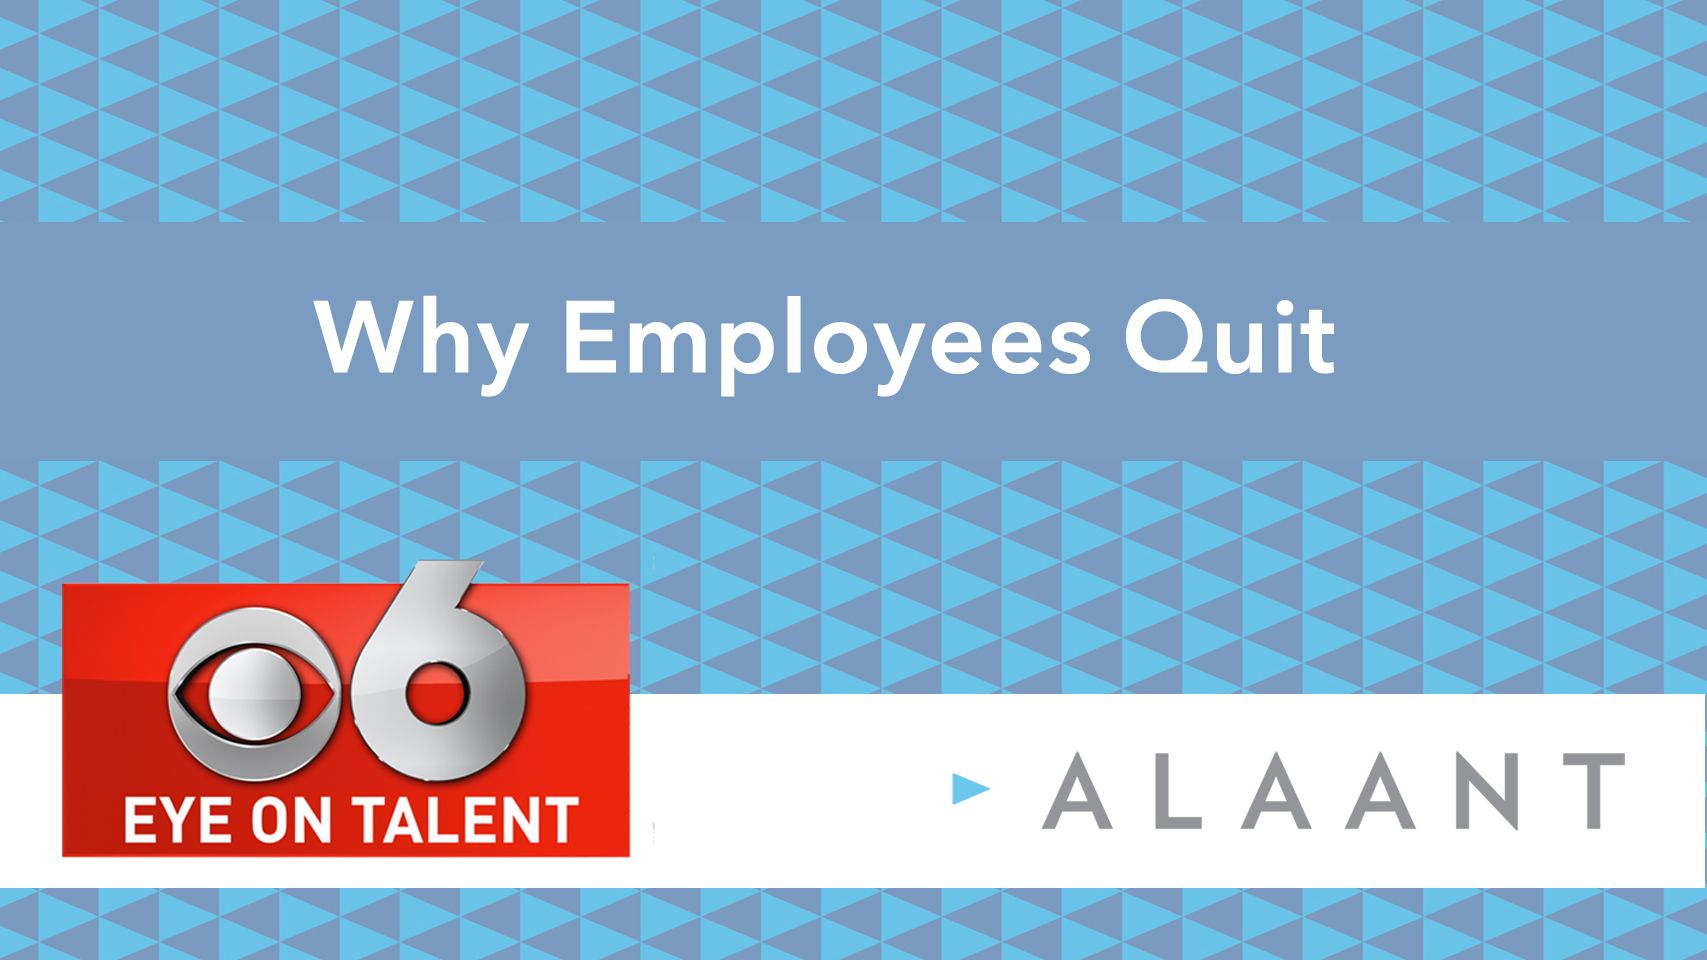 Alaant Eye on Talent Why Employees Quit